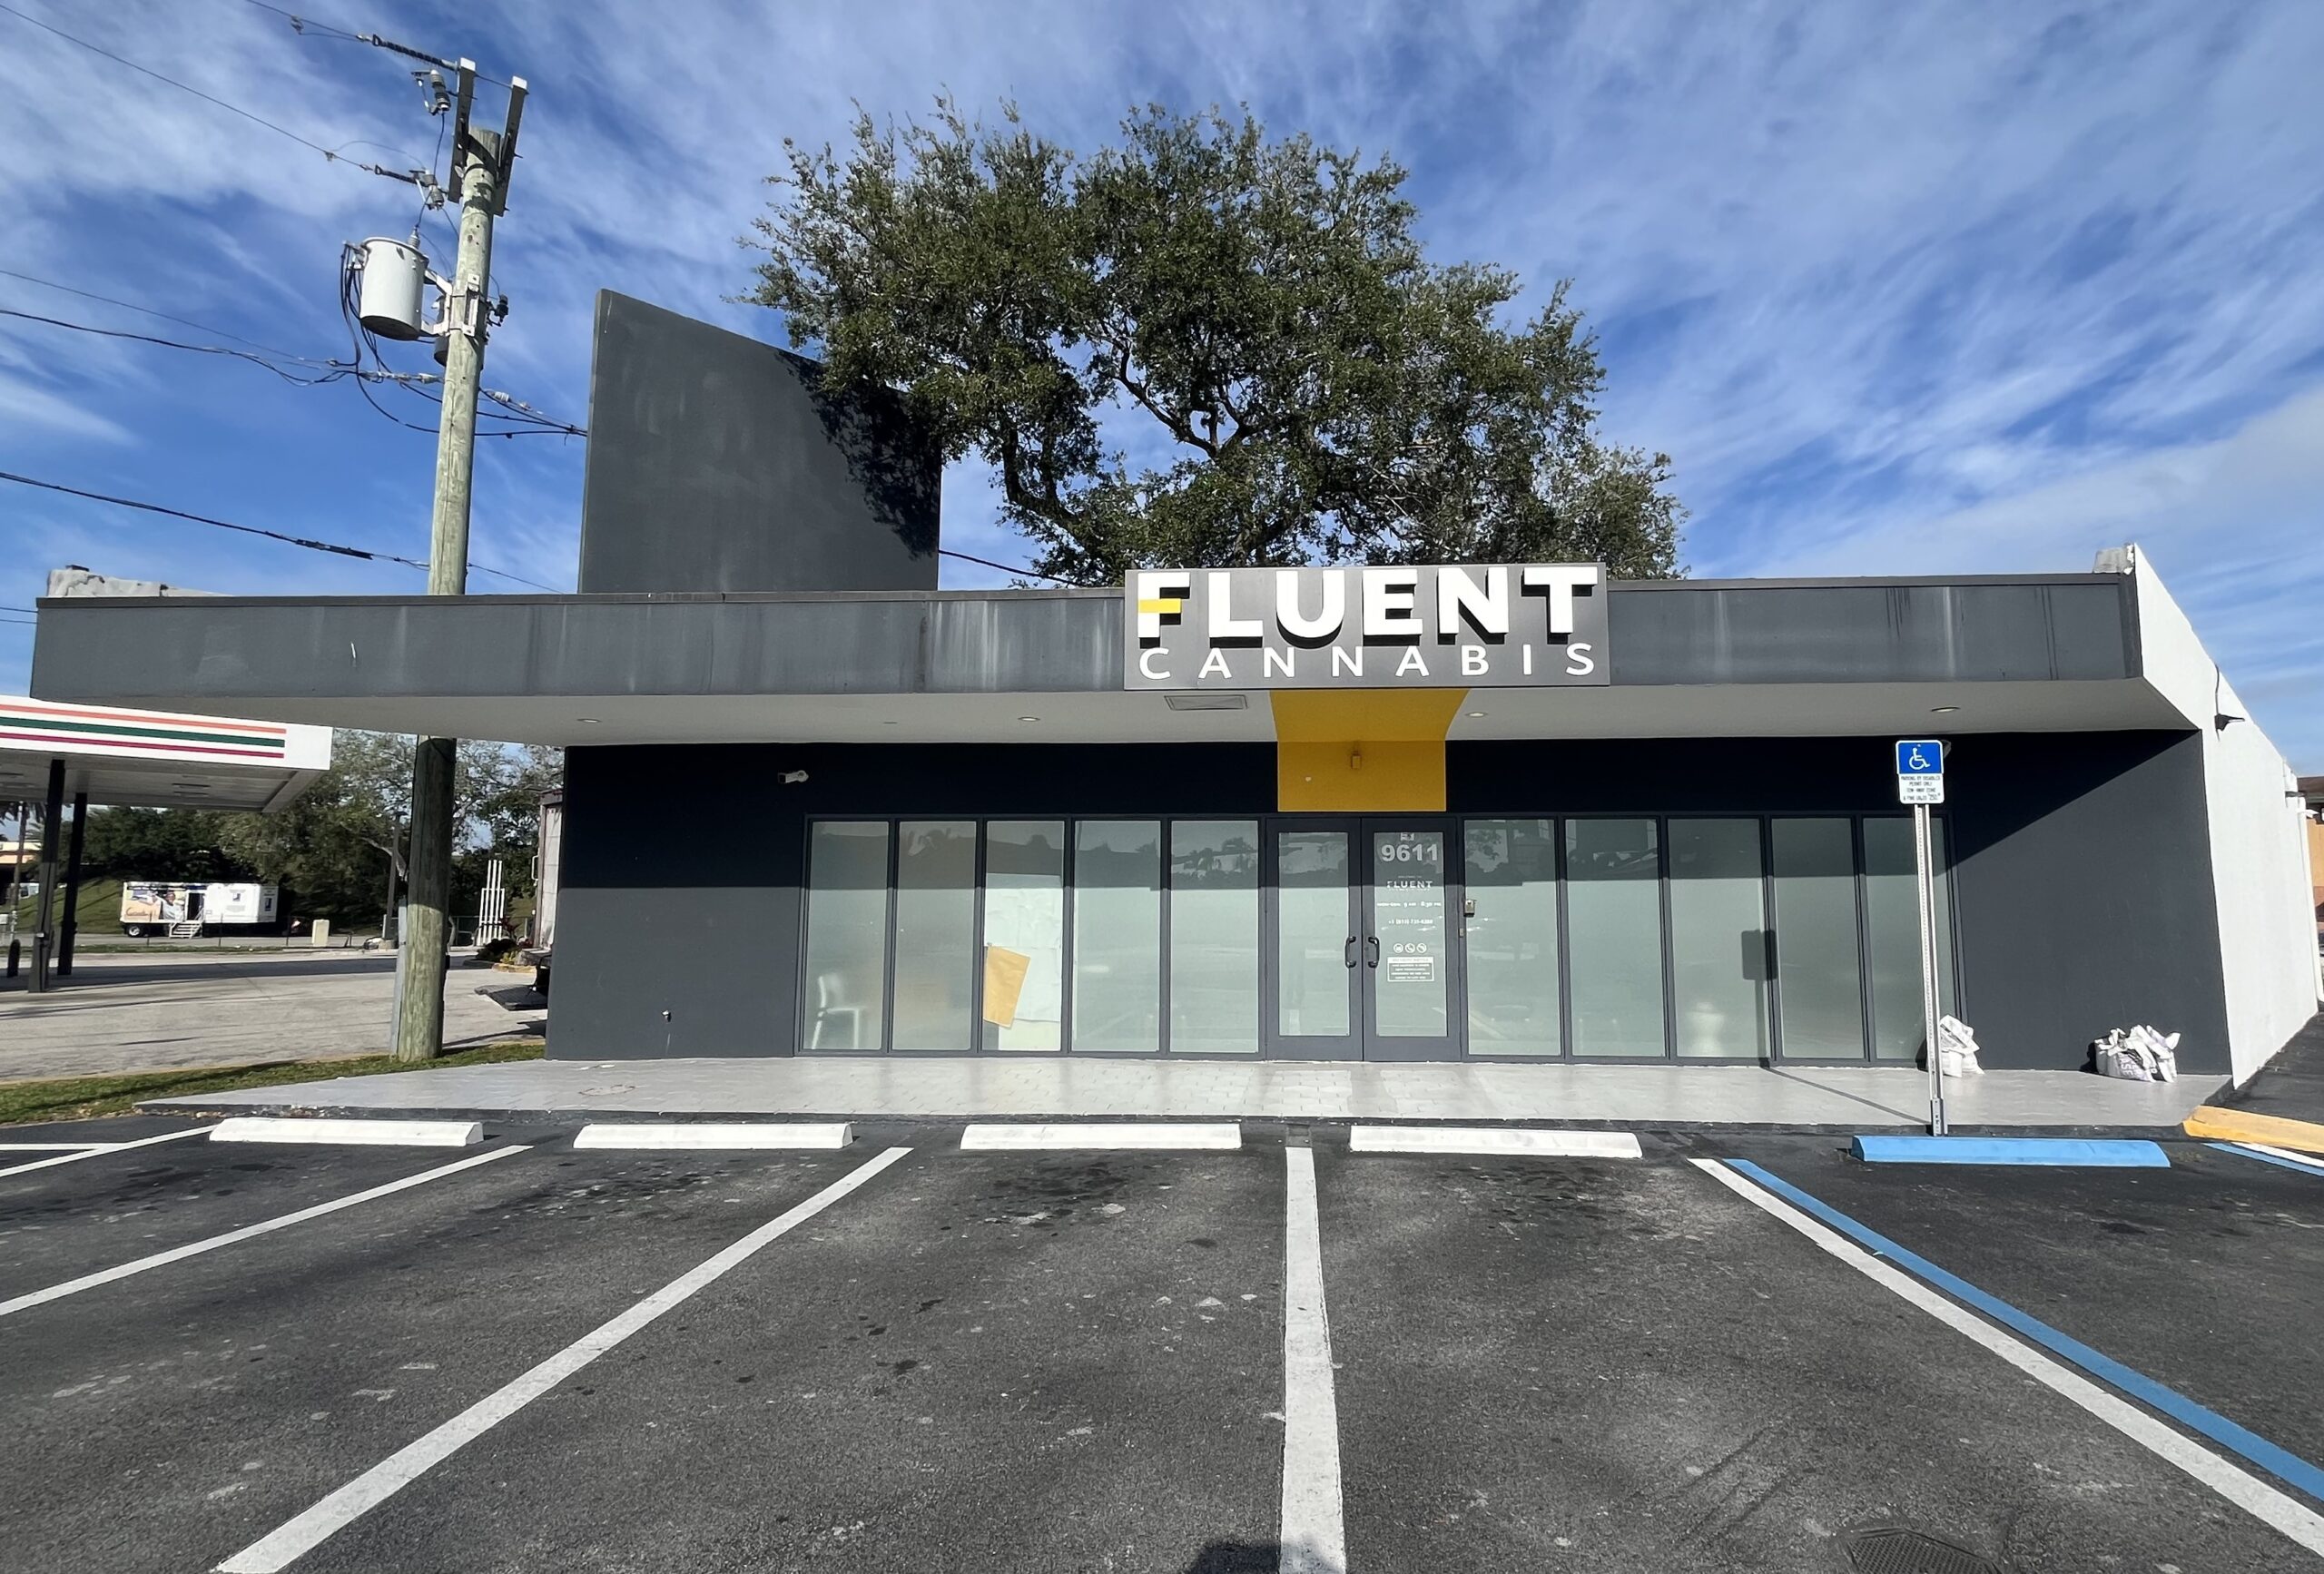 If you're looking for an incredible local dispensary in Miami, come visit our Cannabis Dispensary on 9611 North Kendall Dr! Shop here or online today.